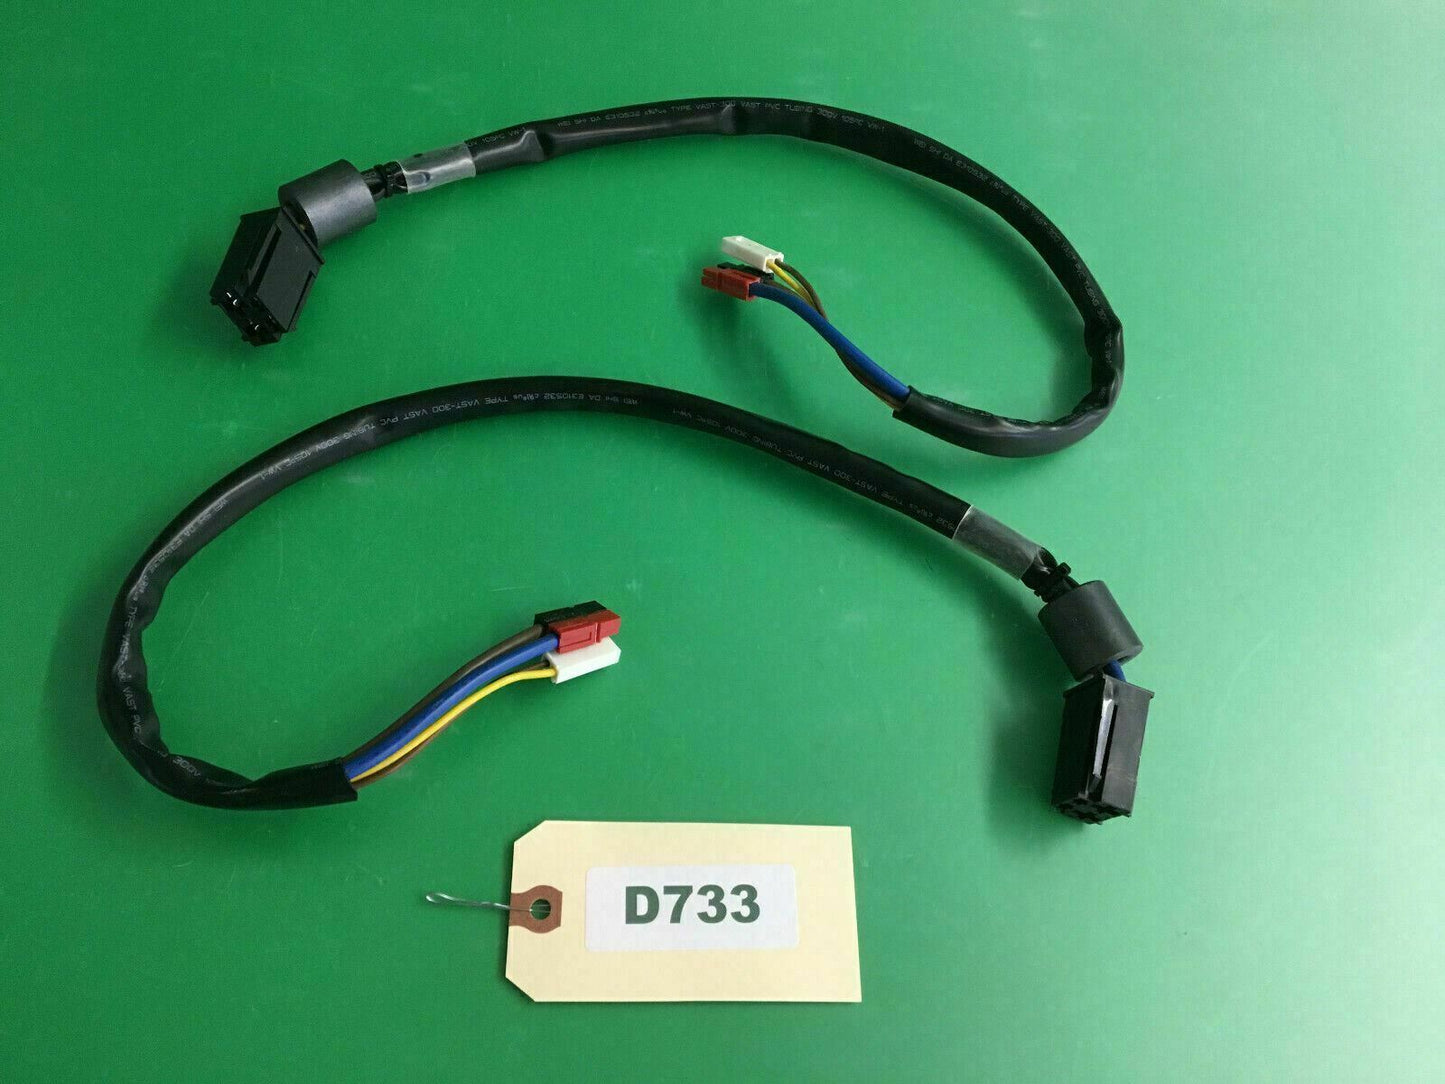 MOTOR CABLES, RIGHT & LEFT for PERMOBIL M300 Power Wheelchair 311547 A/B #D733